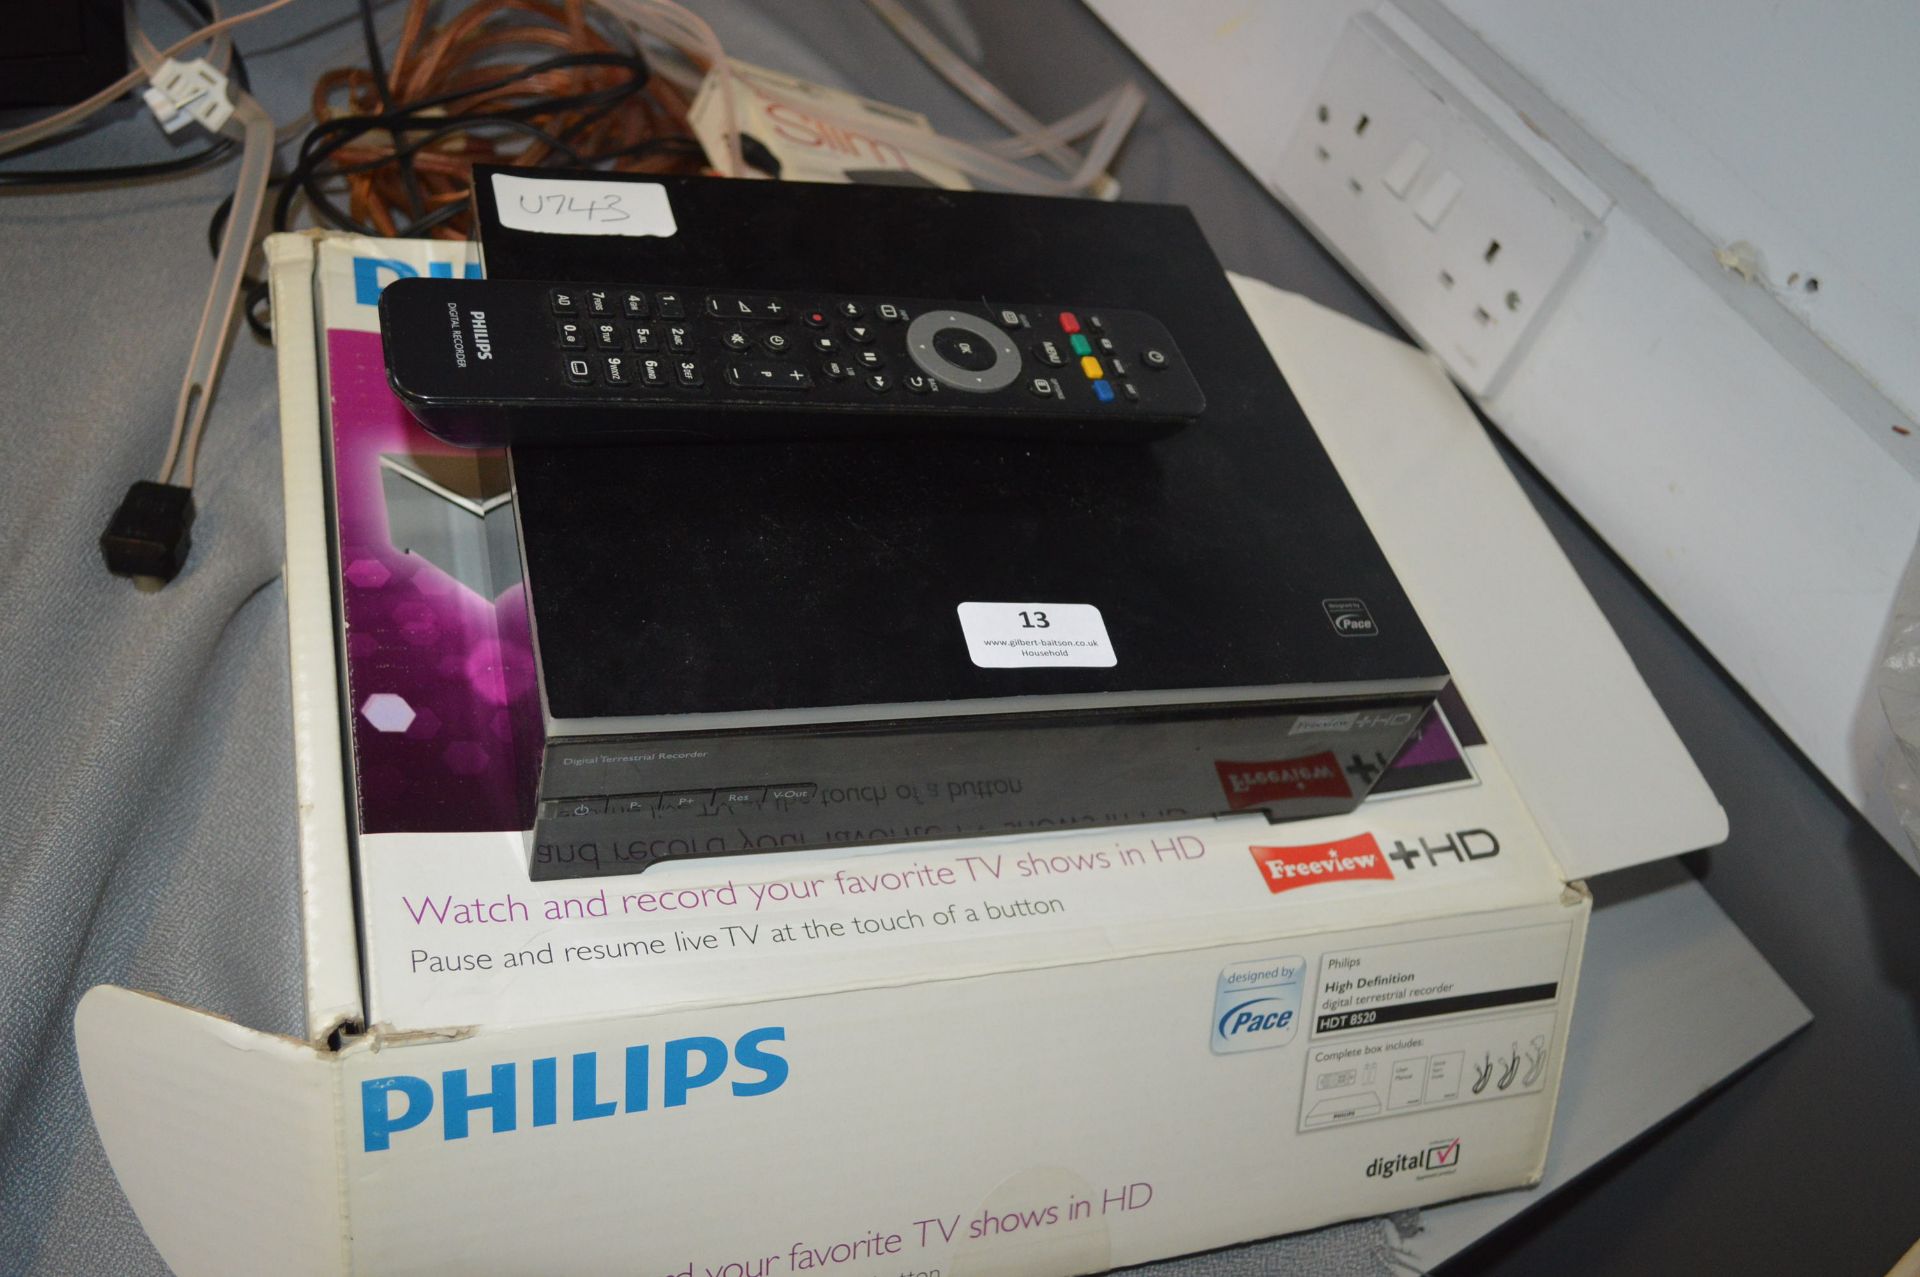 Philips Freeview HD Box, Cables, etc.